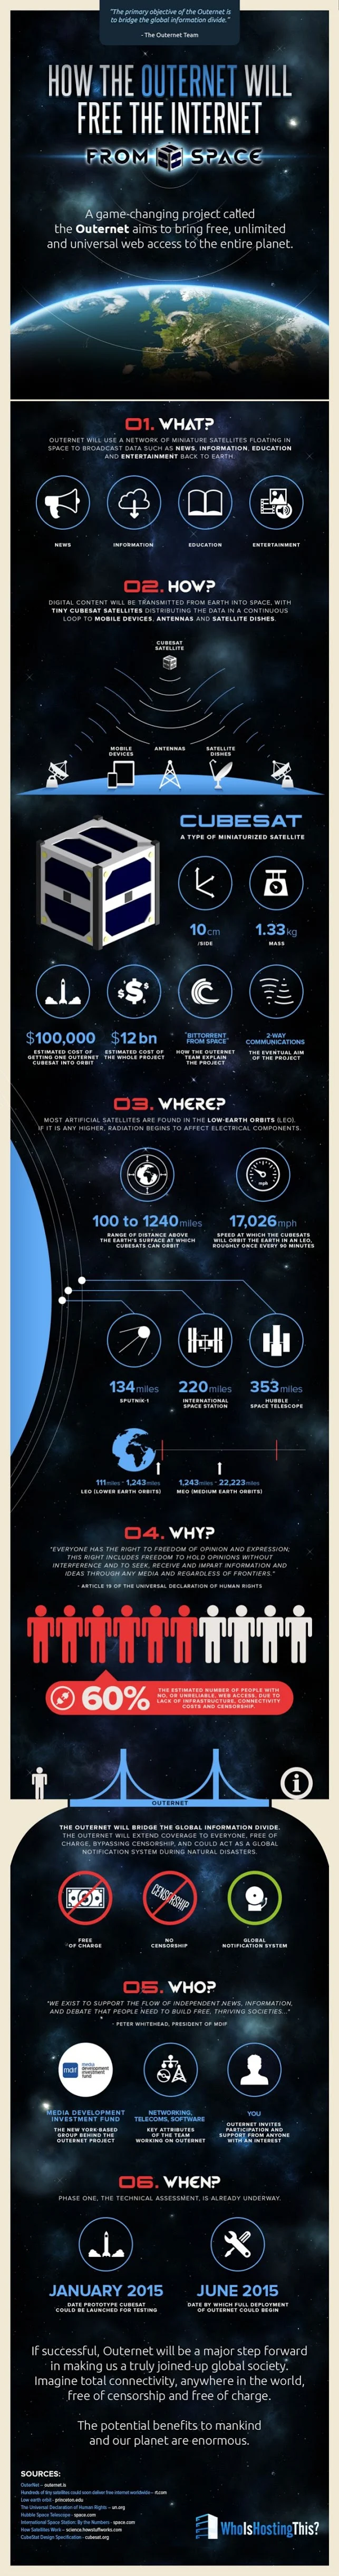 The What, How, Where, Why, Who, When of The Outernet - infographic